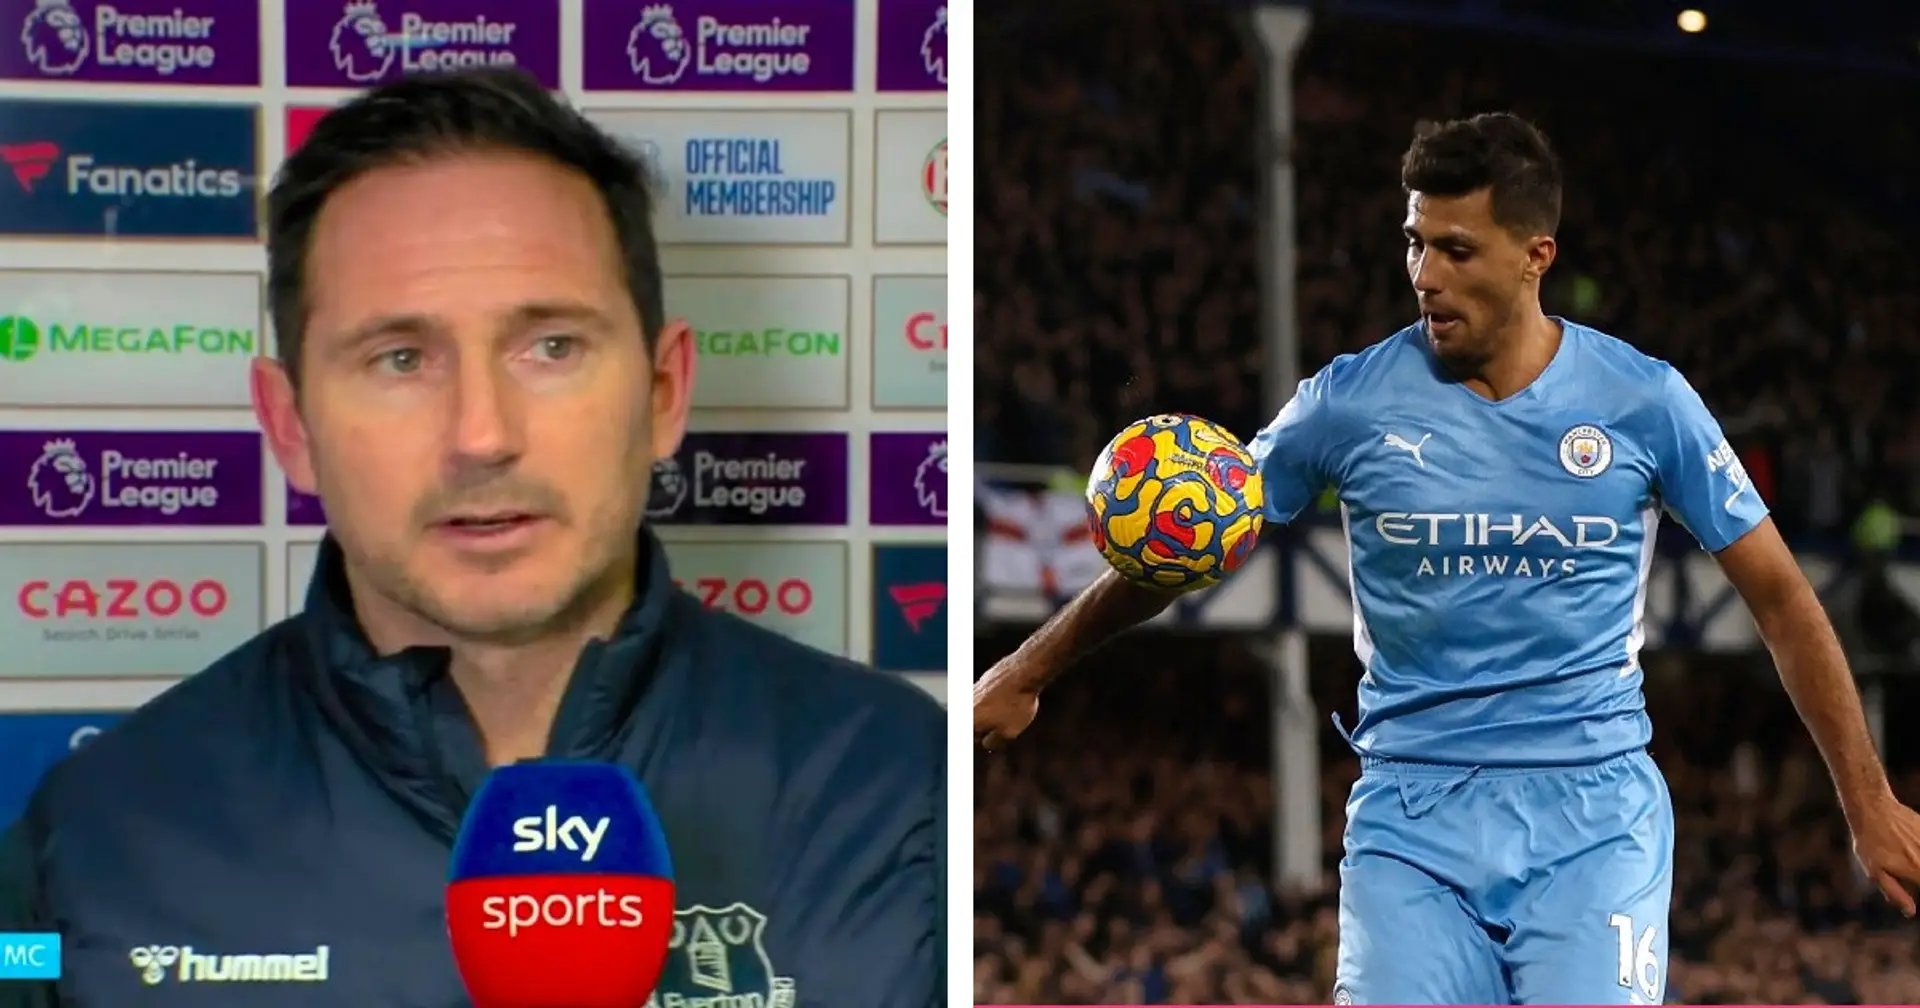 'He can't do his job right': Lampard slams VAR after Kavanagh ignores stonewall penalty incident